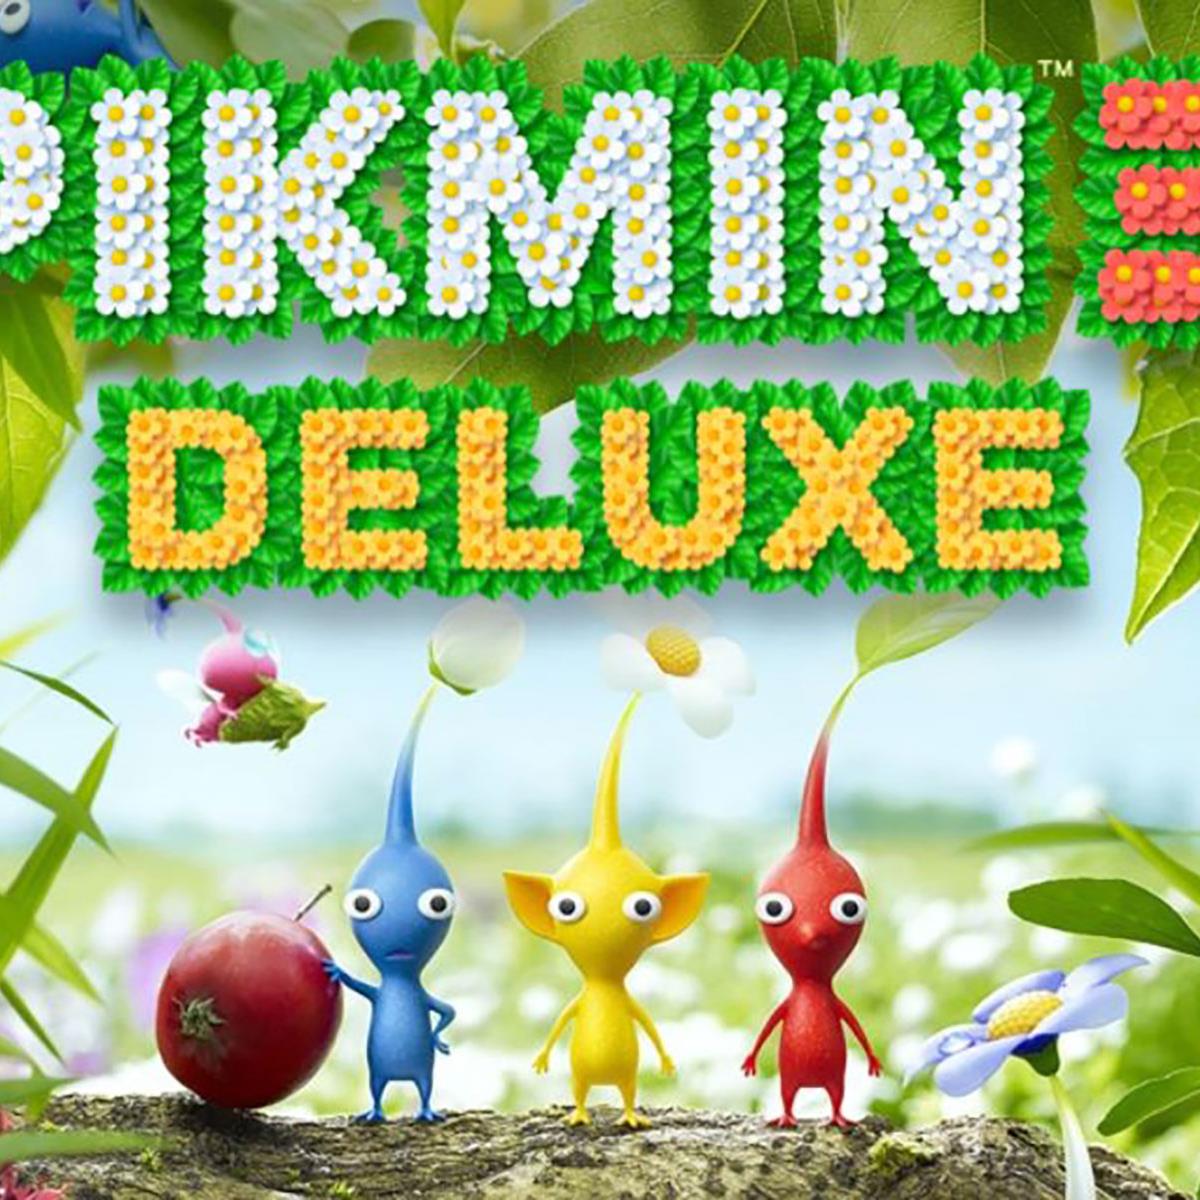 Pikmin 3 Deluxe Headed To Nintendo Switch In October With New Missions |  HotHardware